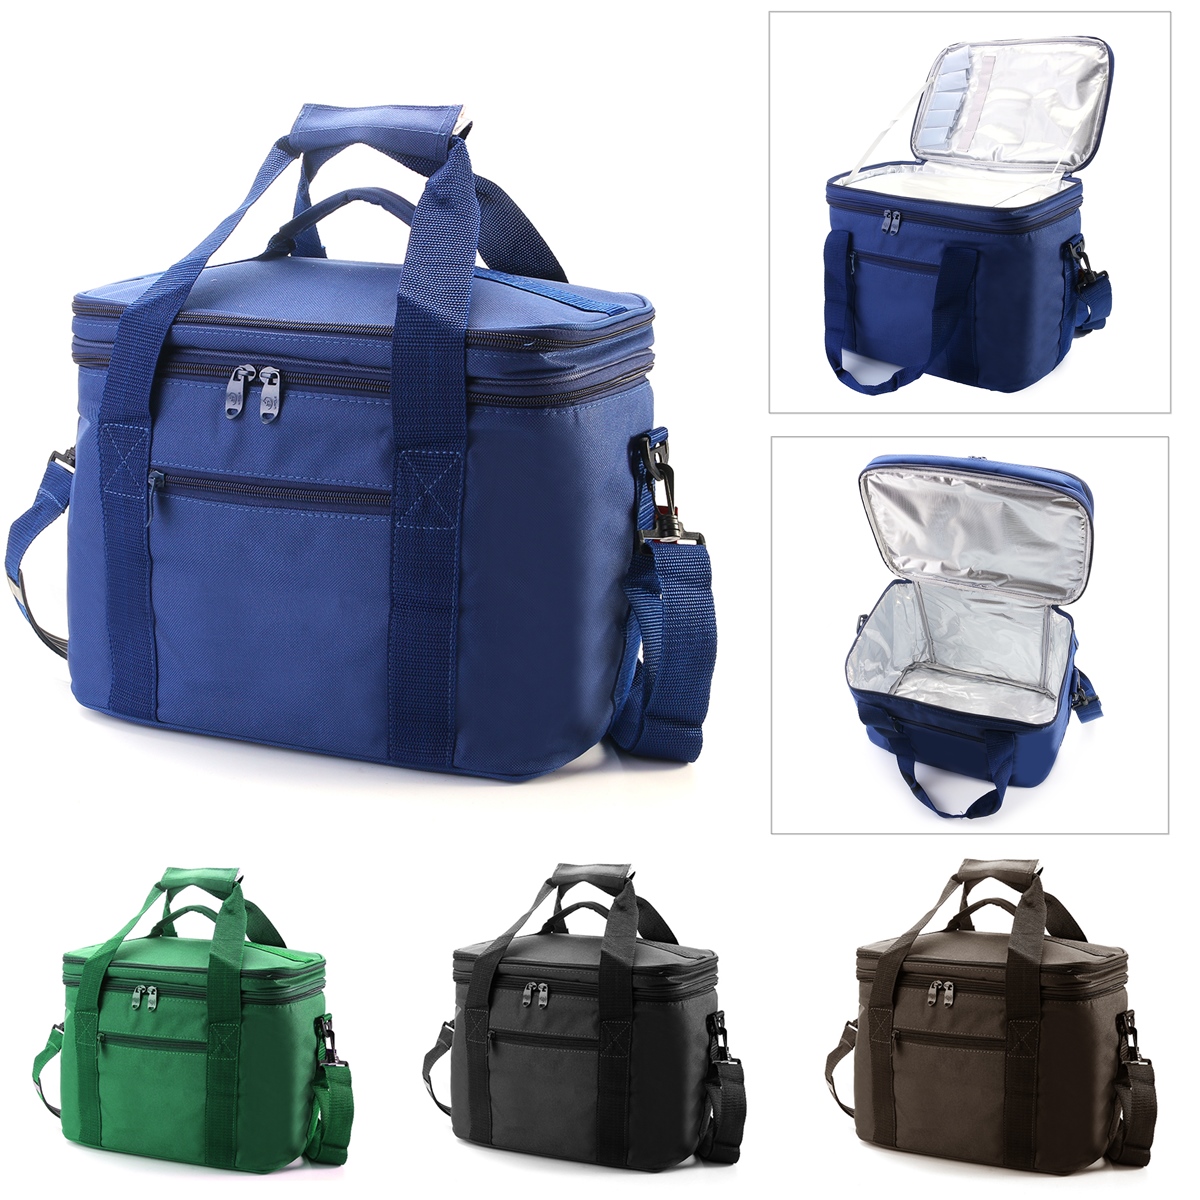 33x20x27cm-Oxford-Double-layer-Insulated-Lunch-Bag-Large-Capacity-Travel-Outdoor-Picnic-Tote-Bag-1199100-1